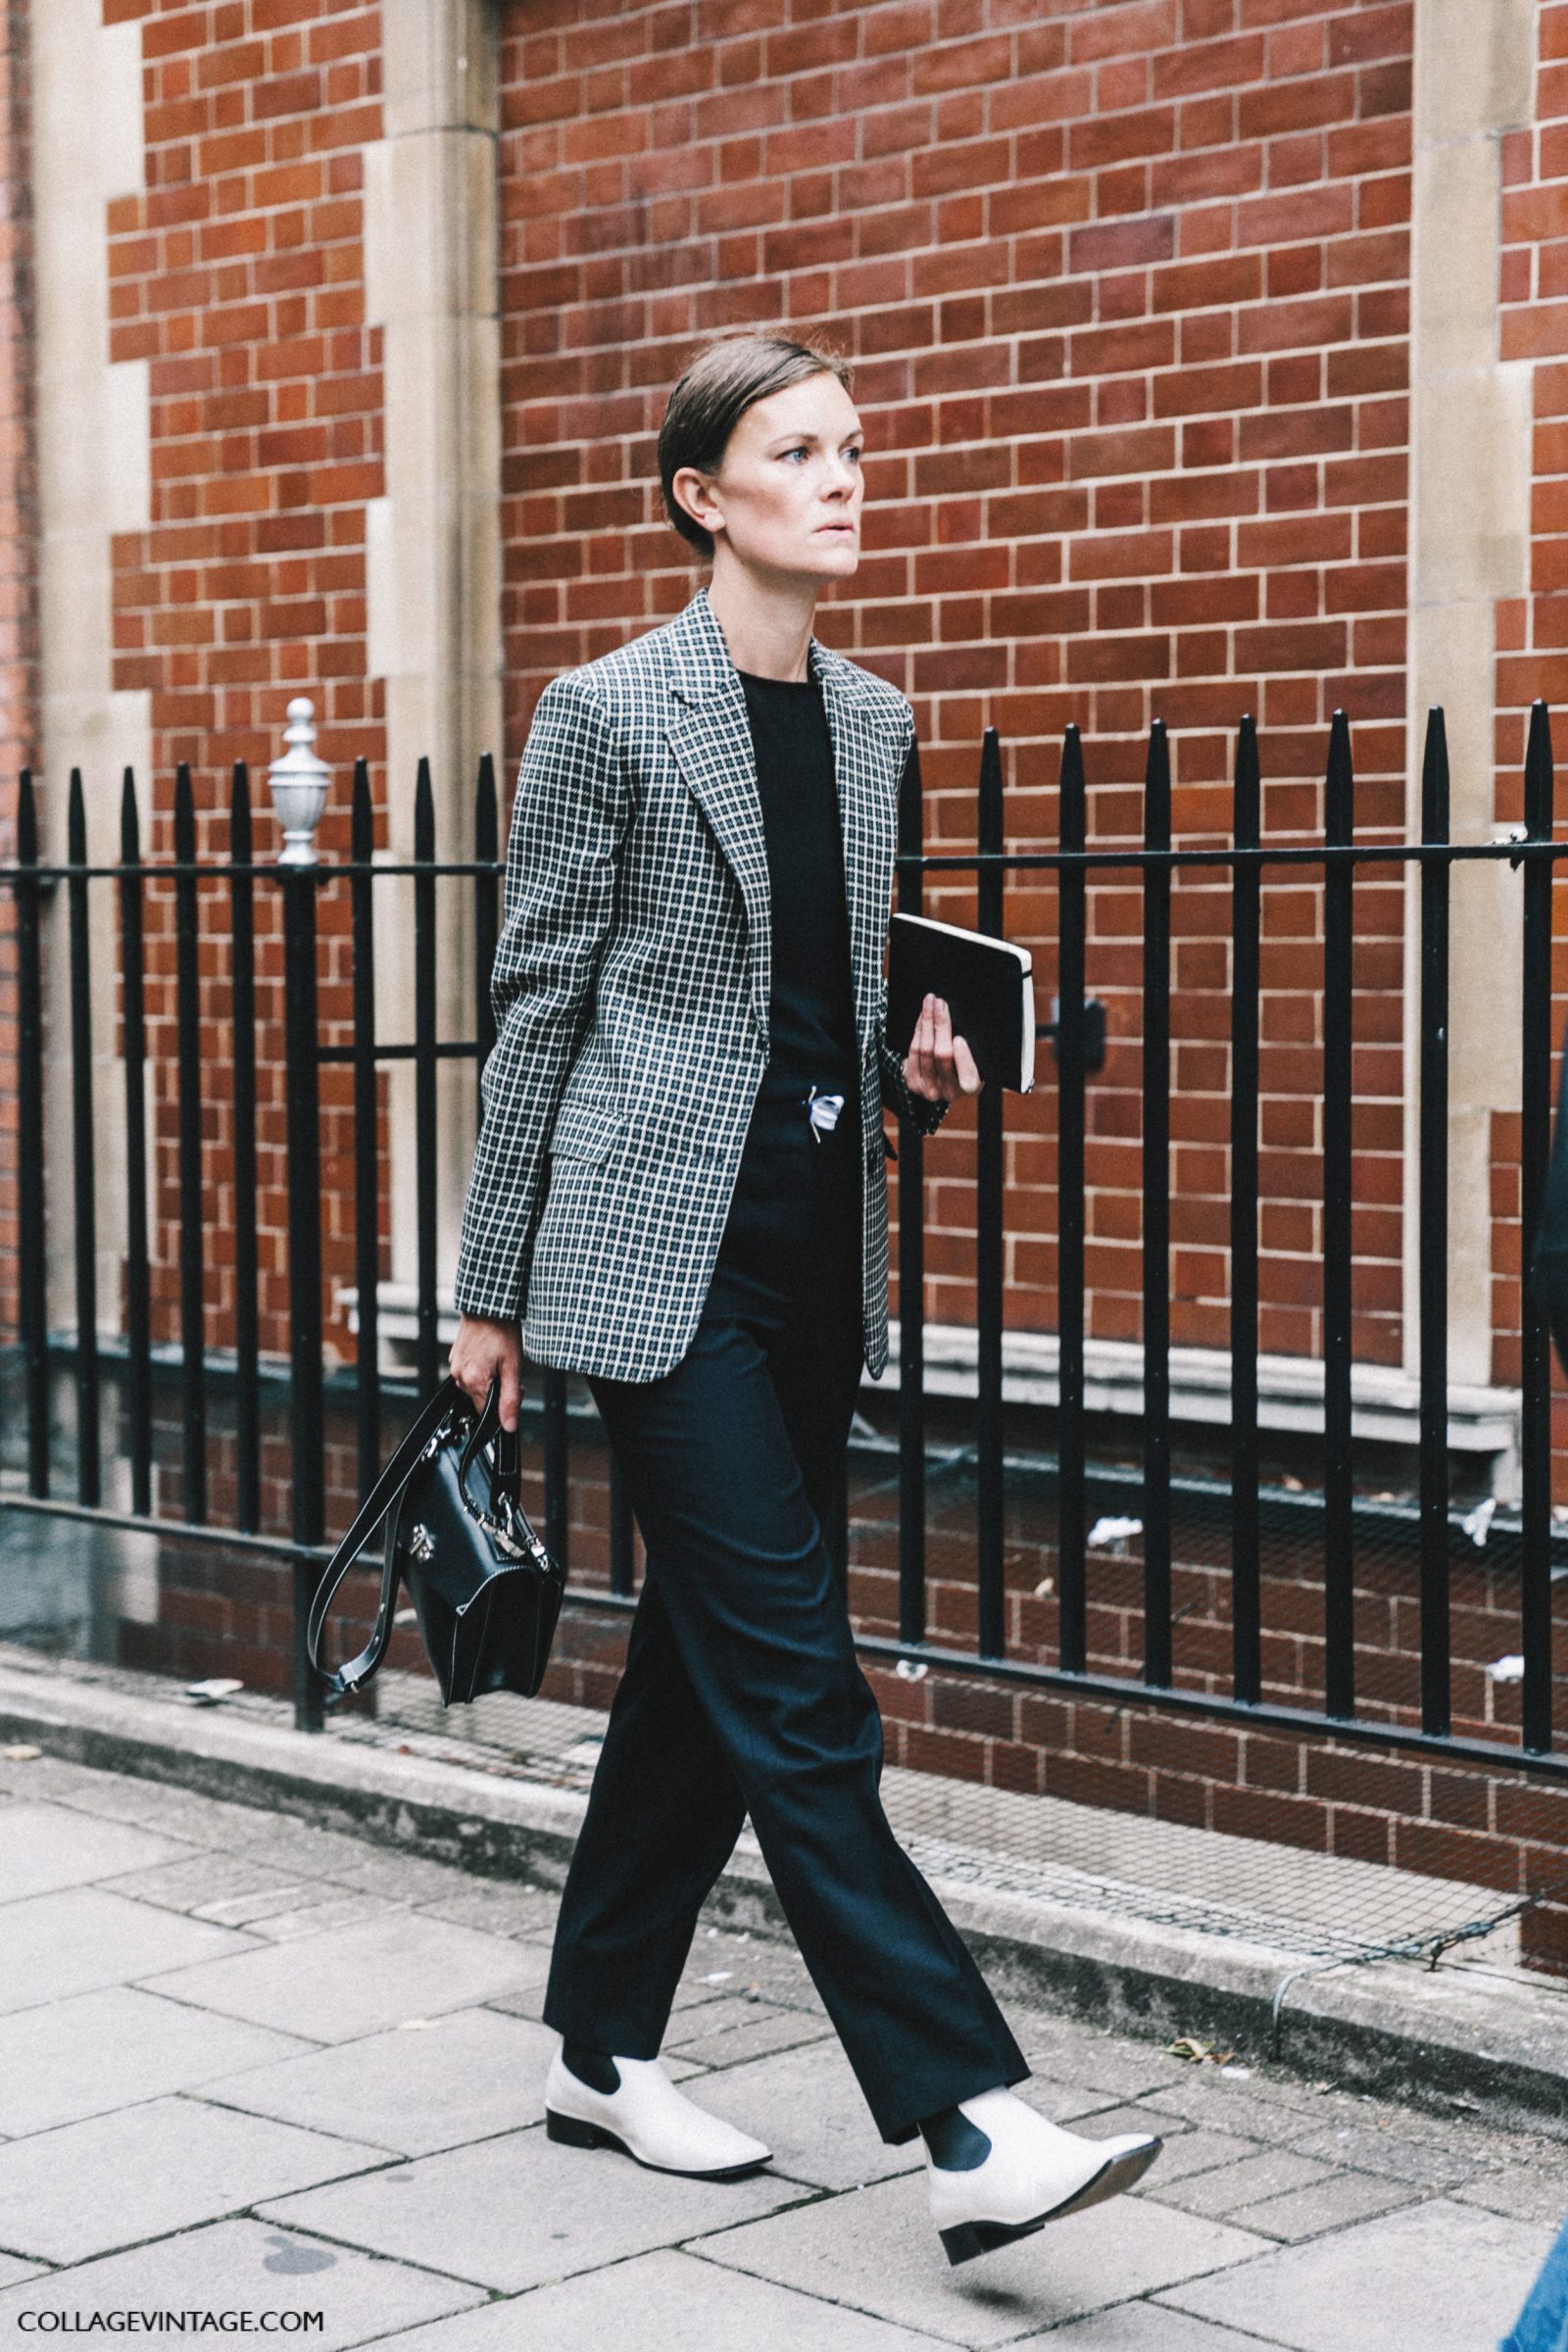 lfw-london_fashion_week_ss17-street_style-outfits-collage_vintage-vintage-jw_anderson-house_of_holland-40